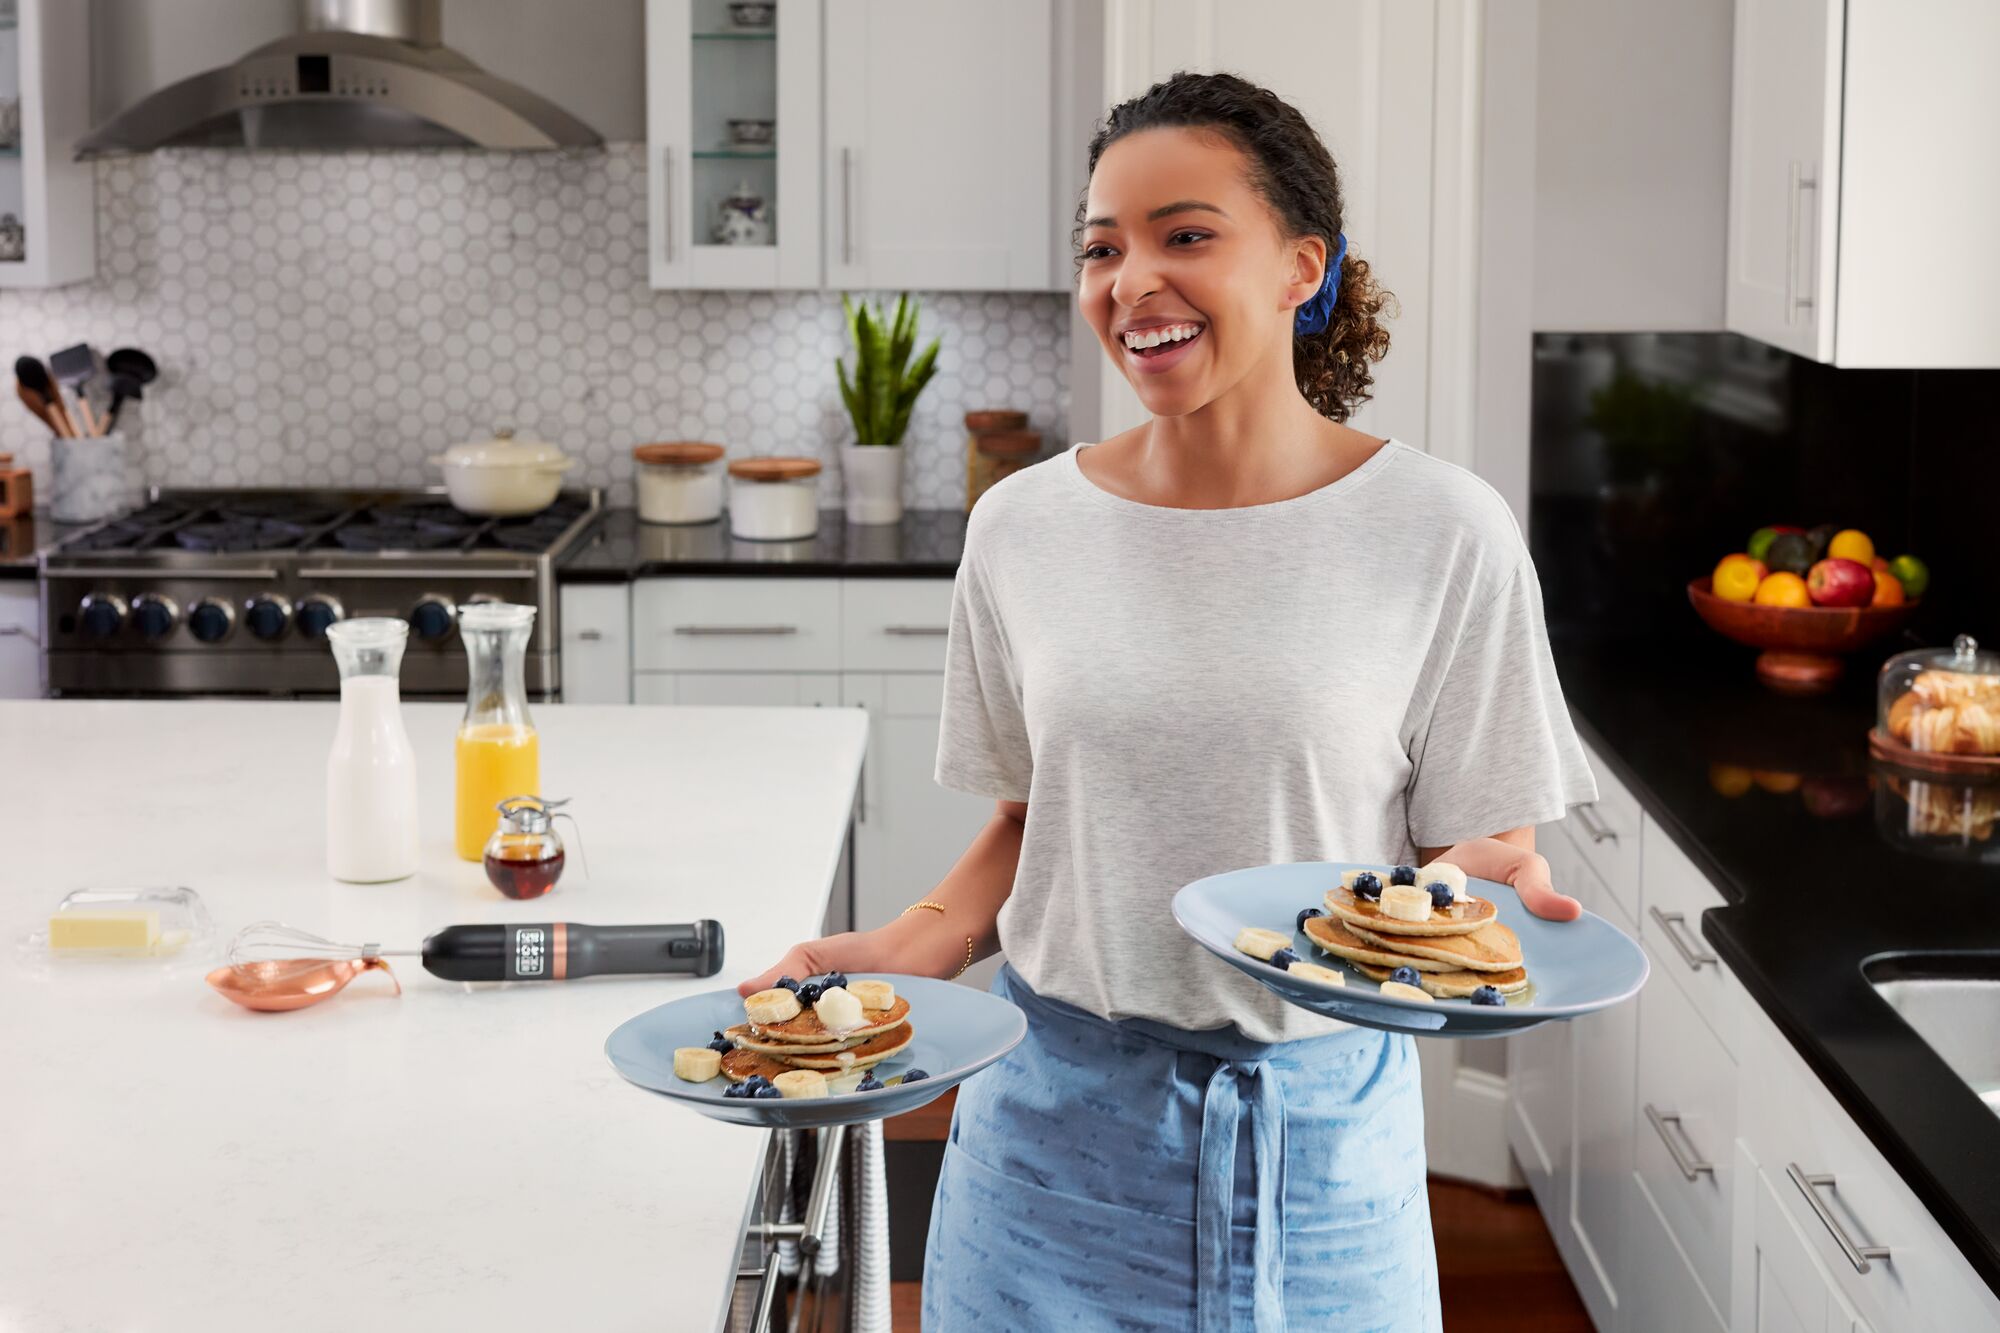 Talent holding two plates of pancakes with grey kitchen wand with whisk attachment visible on countertop in the background